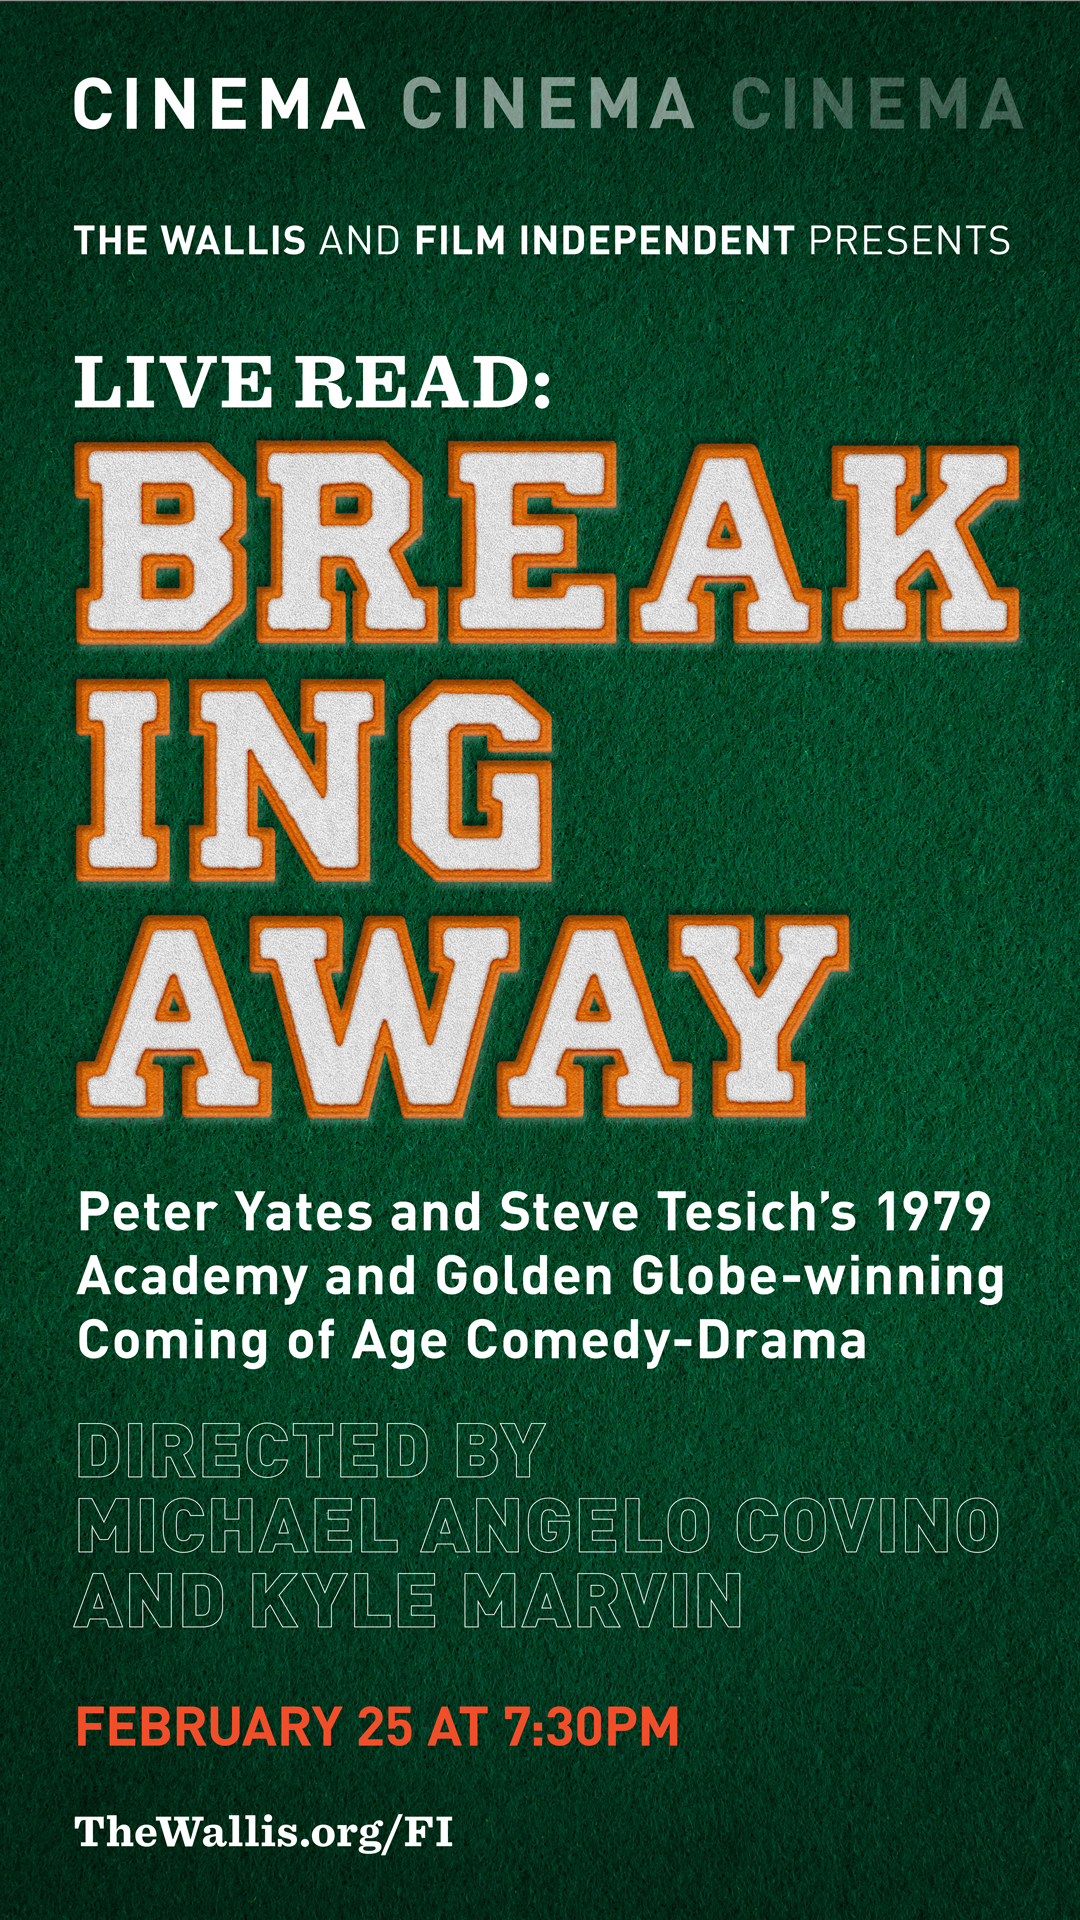 A Live Read of BREAKING AWAY